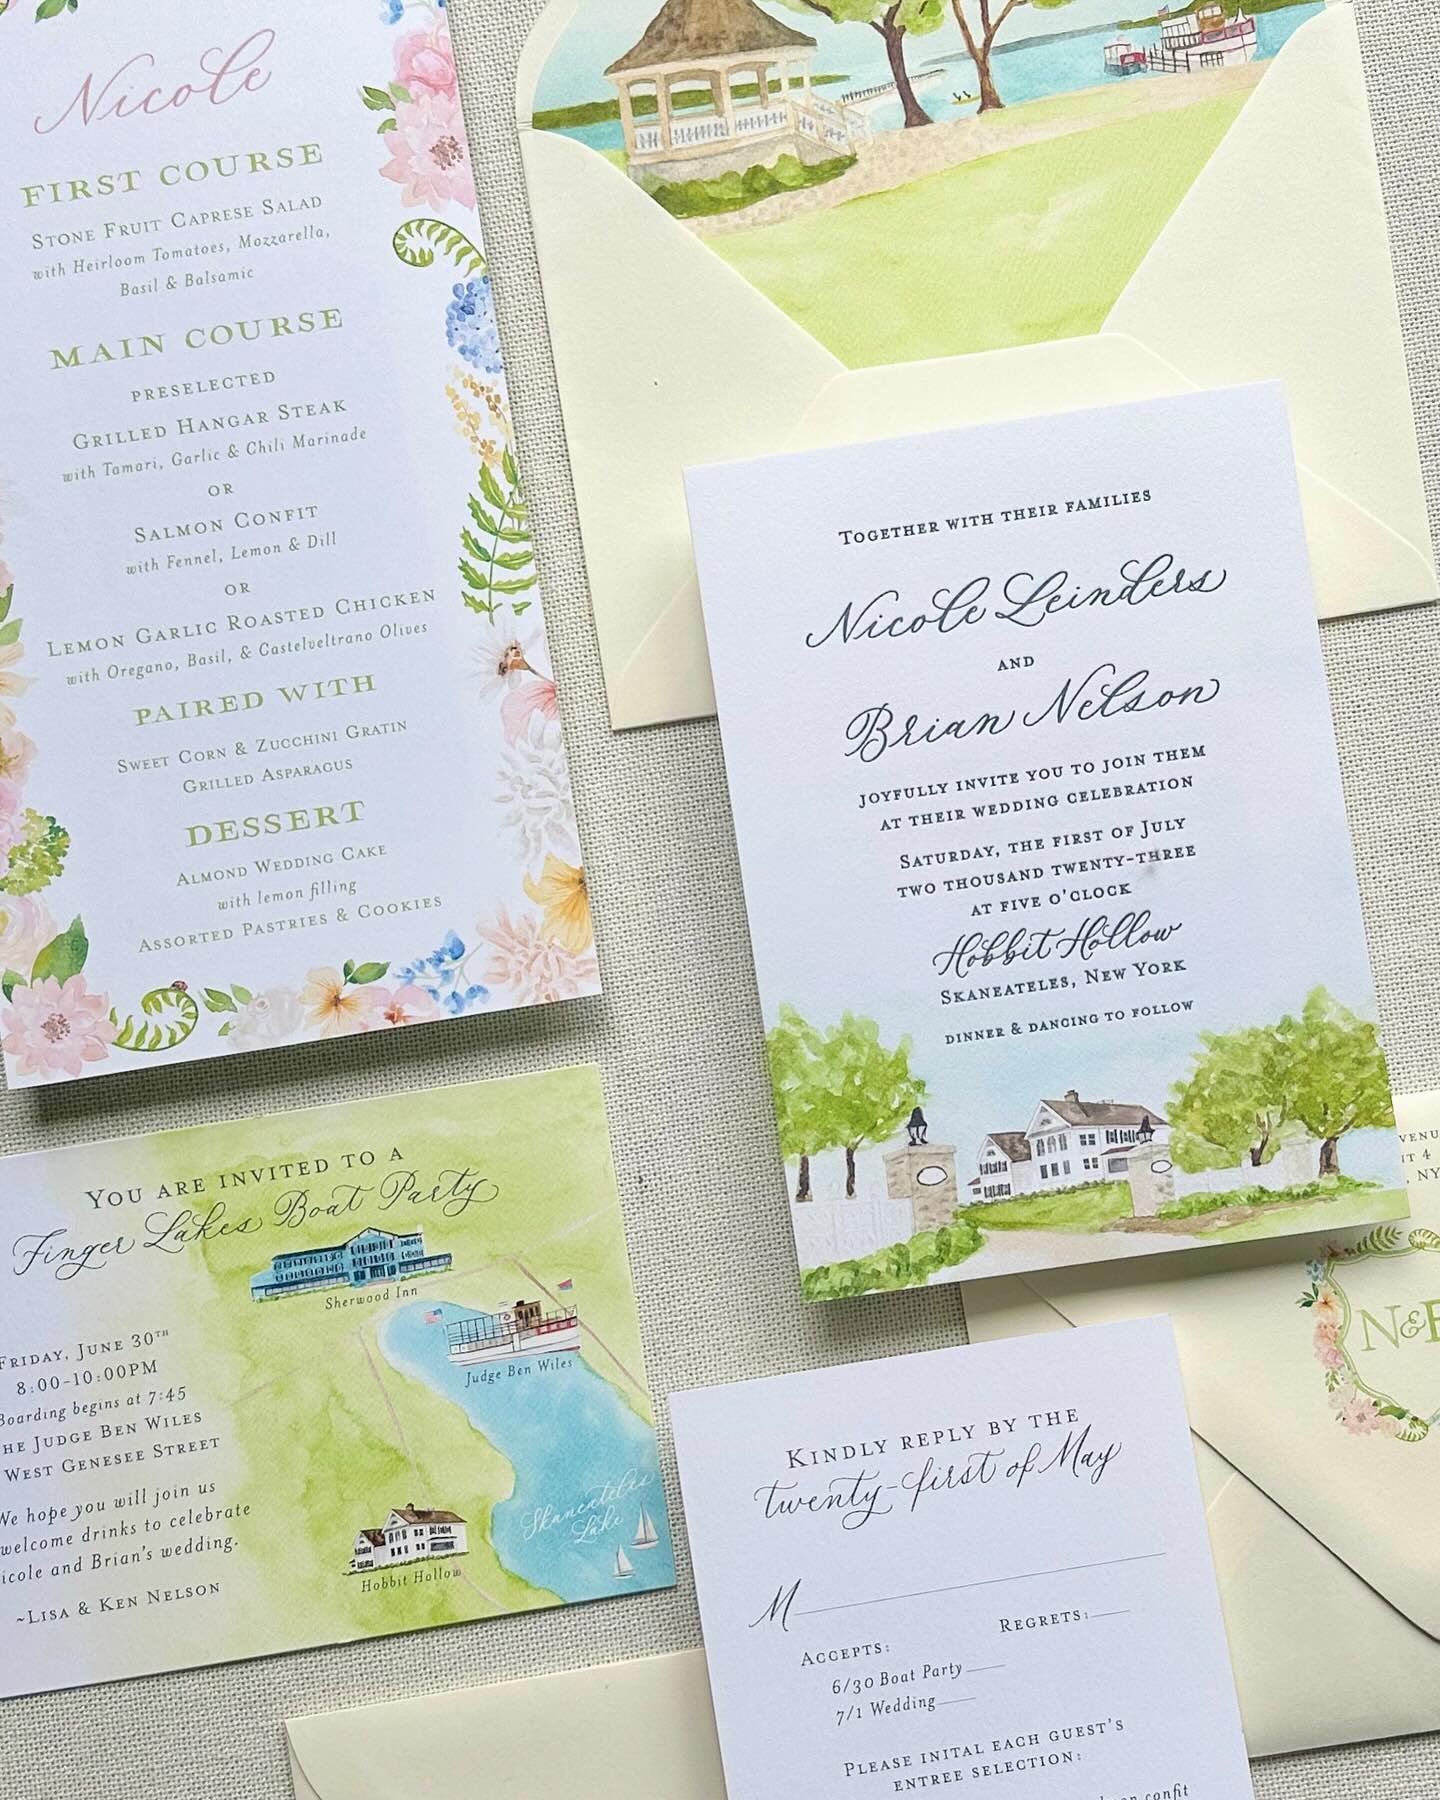 For N&amp;B&rsquo;s wedding this past July. Customs watercolor venue illustration, letterpress, custom map and the brightest florals for their dinner menus 🌸🌼